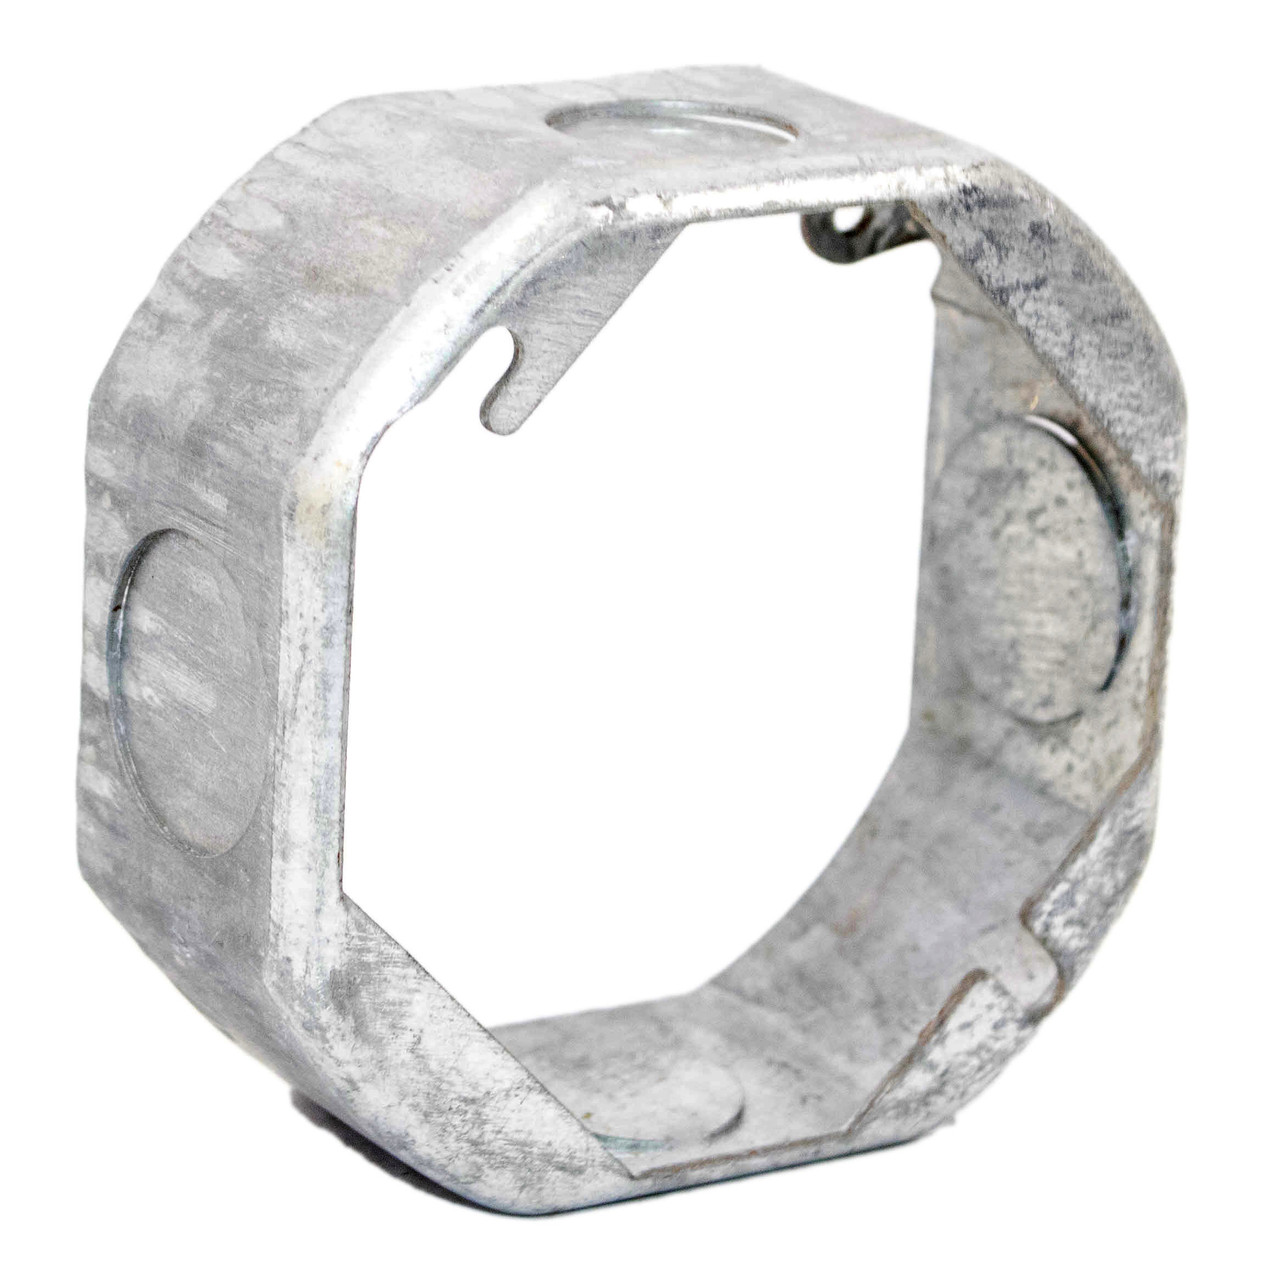 Steel City 55151-1/2-3/4 Octagon Box Extension Ring 4 x 1-1/2 Inch